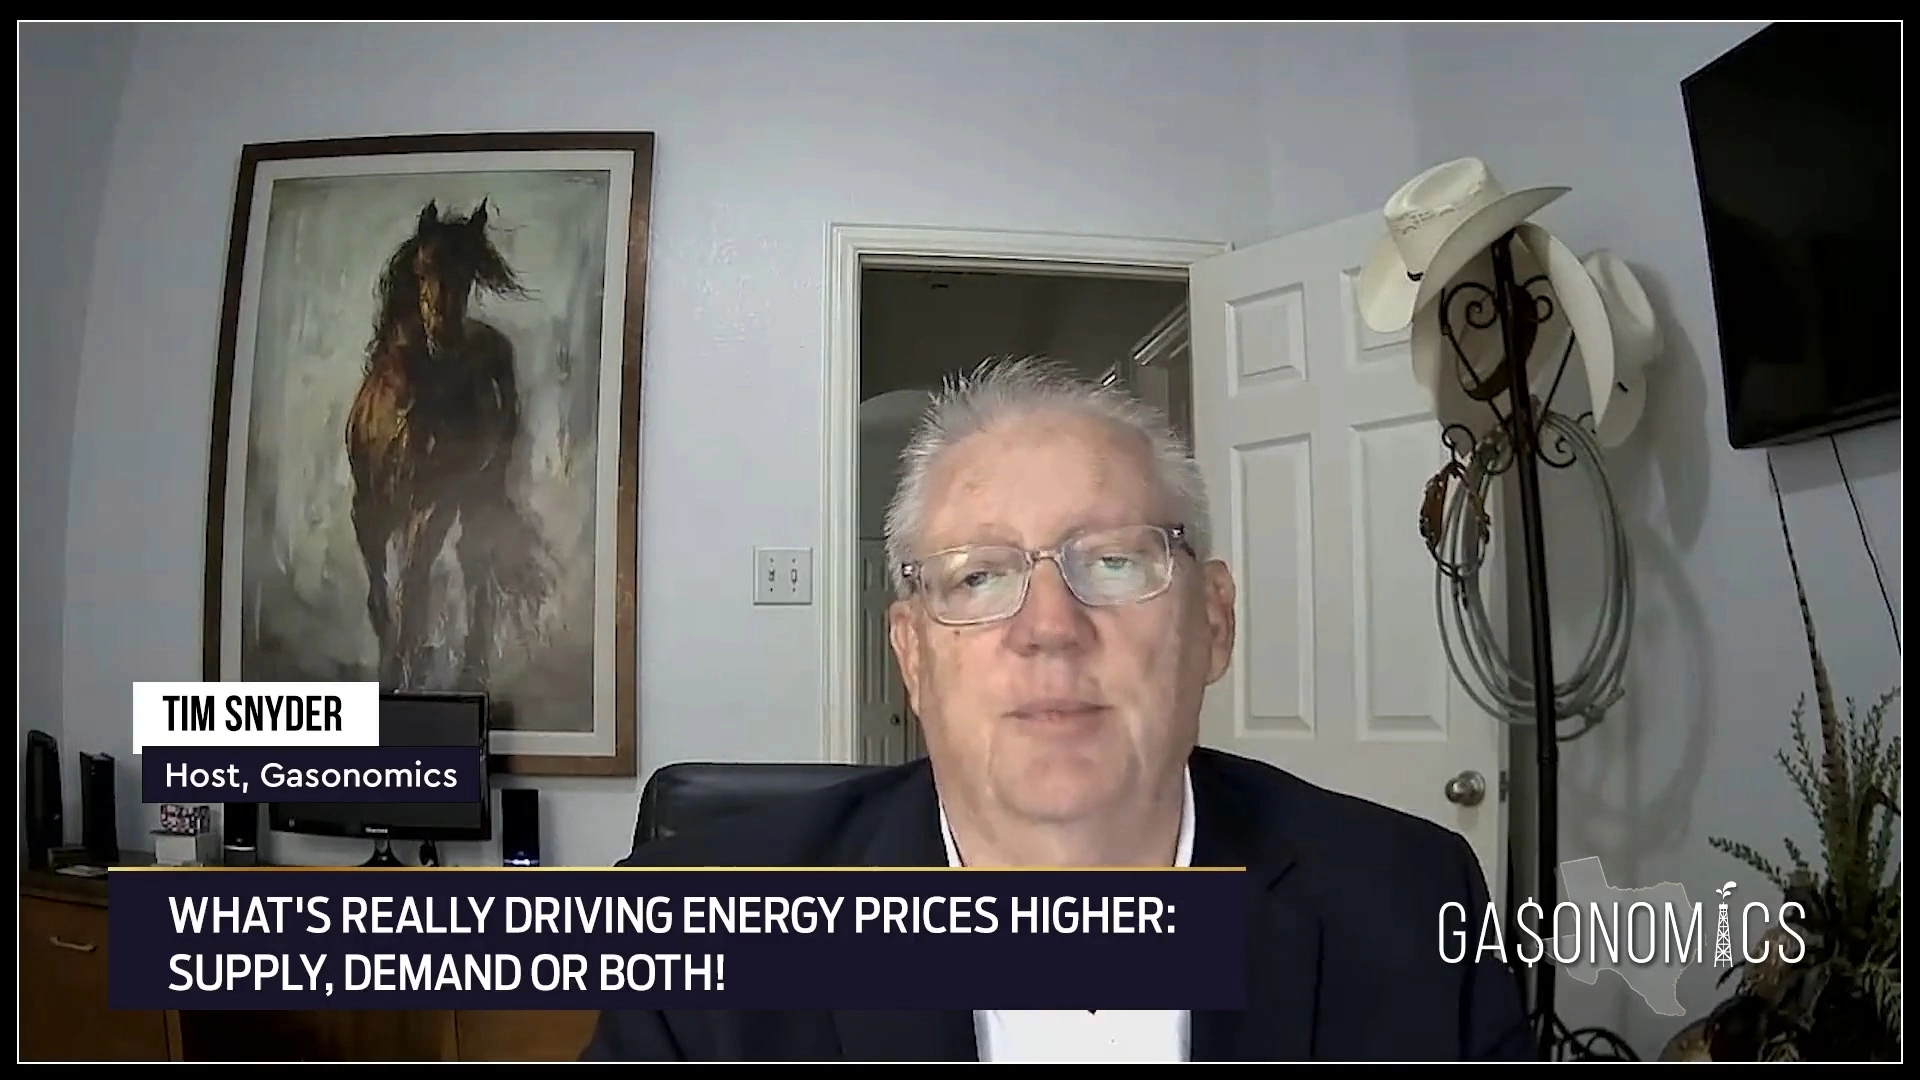 Gasonomics: What’s Really Driving Energy Prices Higher?